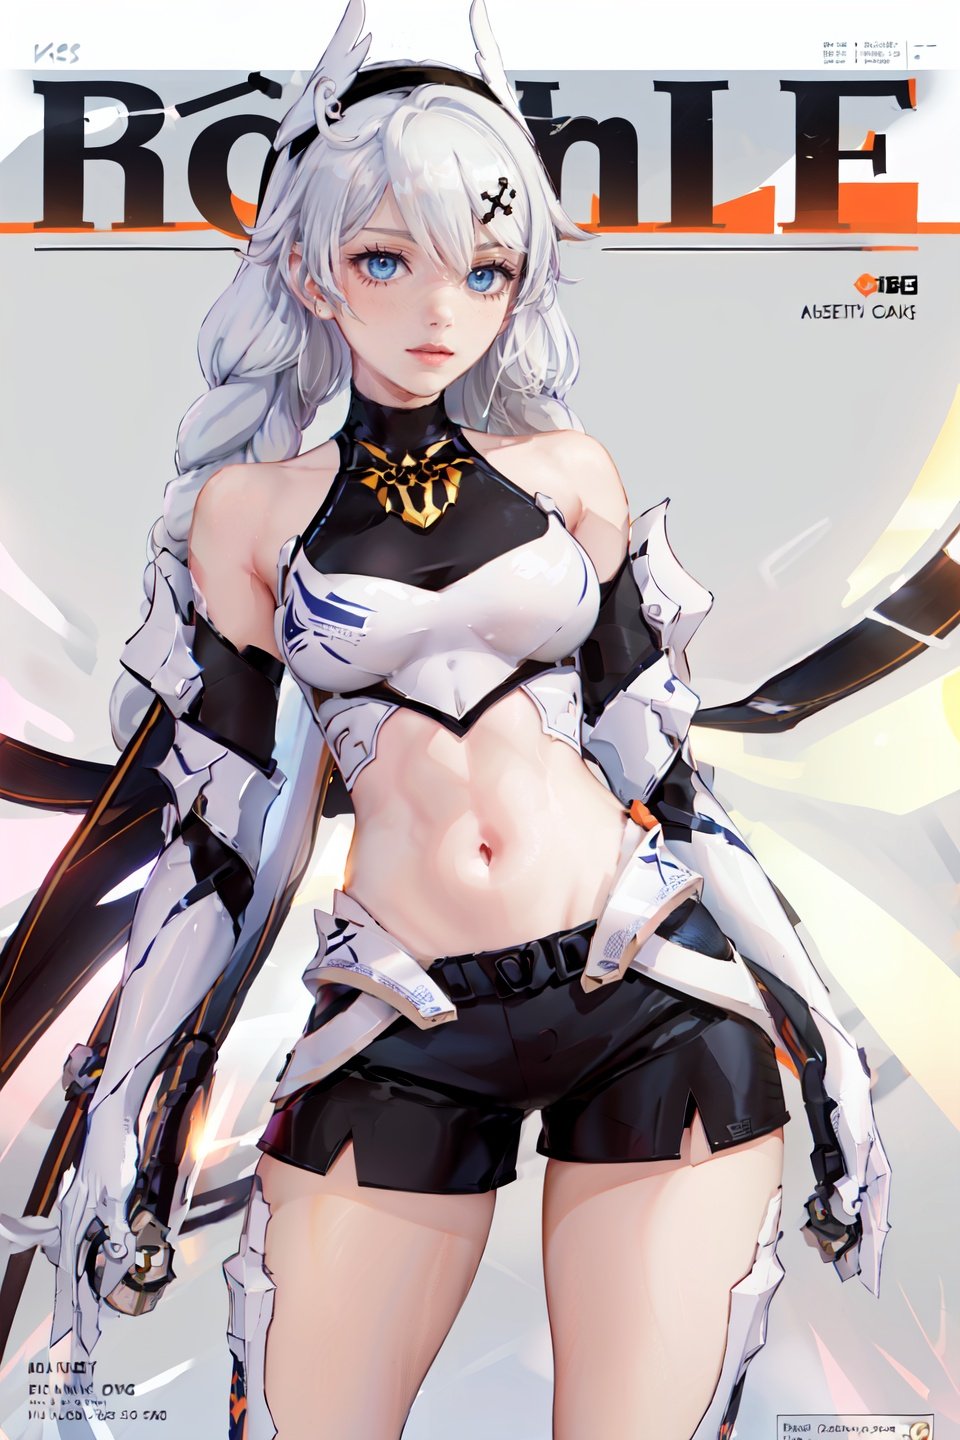 (best quality), (ultra detailed), ((masterpiece)), sfw,consored,illustration, ray tracing,contrapposto, female focus,model, 
///////////////////
(yueguang, white armor,orange Light wings, winged hair ornament:1.2), blue eyes, wings,white cuish,white hair, blue eyes, braid, long hair, twin braids, bangs, bare shoulders
//////////////////////////
sexy, fine fabric emphasis,wall paper, crowds, fashion, Lipstick, depth of field, street, in public,(Magazine cover:1.2),(title),(Magazine cover-style illustration of a fashionable woman), posing in front of a colorful and dynamic background.  (The text on the cover should be bold and attention-grabbing, with the title of the magazine and a catchy headline). 